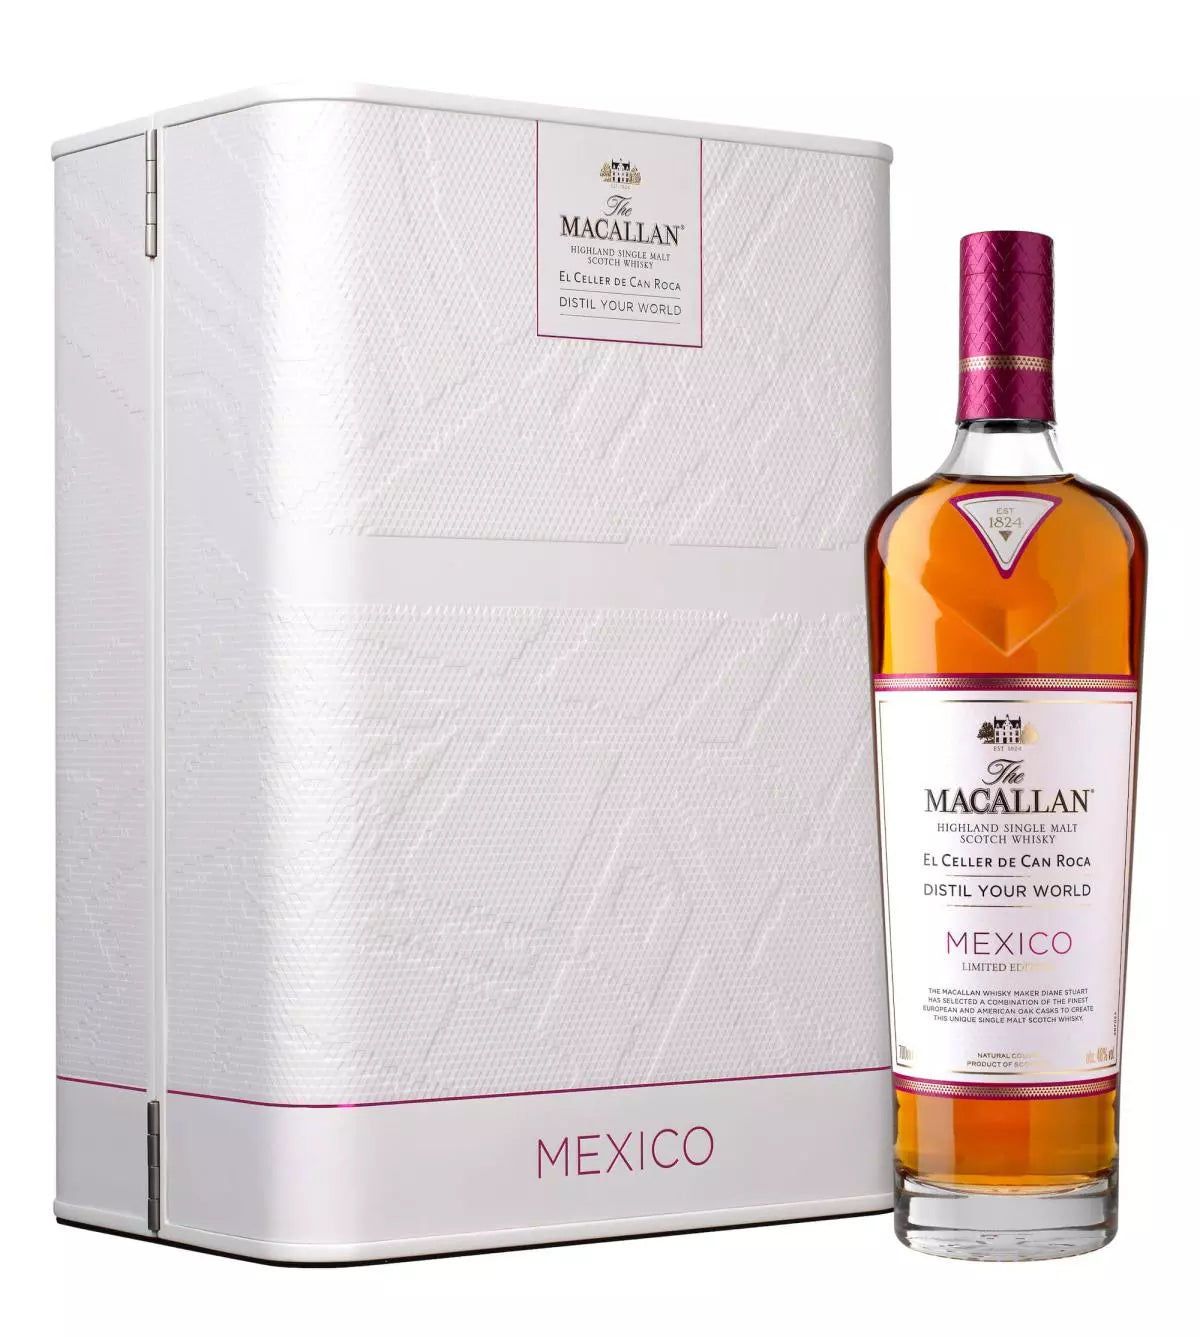 Macallan Mexico Limited Edition El Celler De Can Roca Distil Your World 700mL a closed white box next to a tall clear glass bottle with a white label and purple top